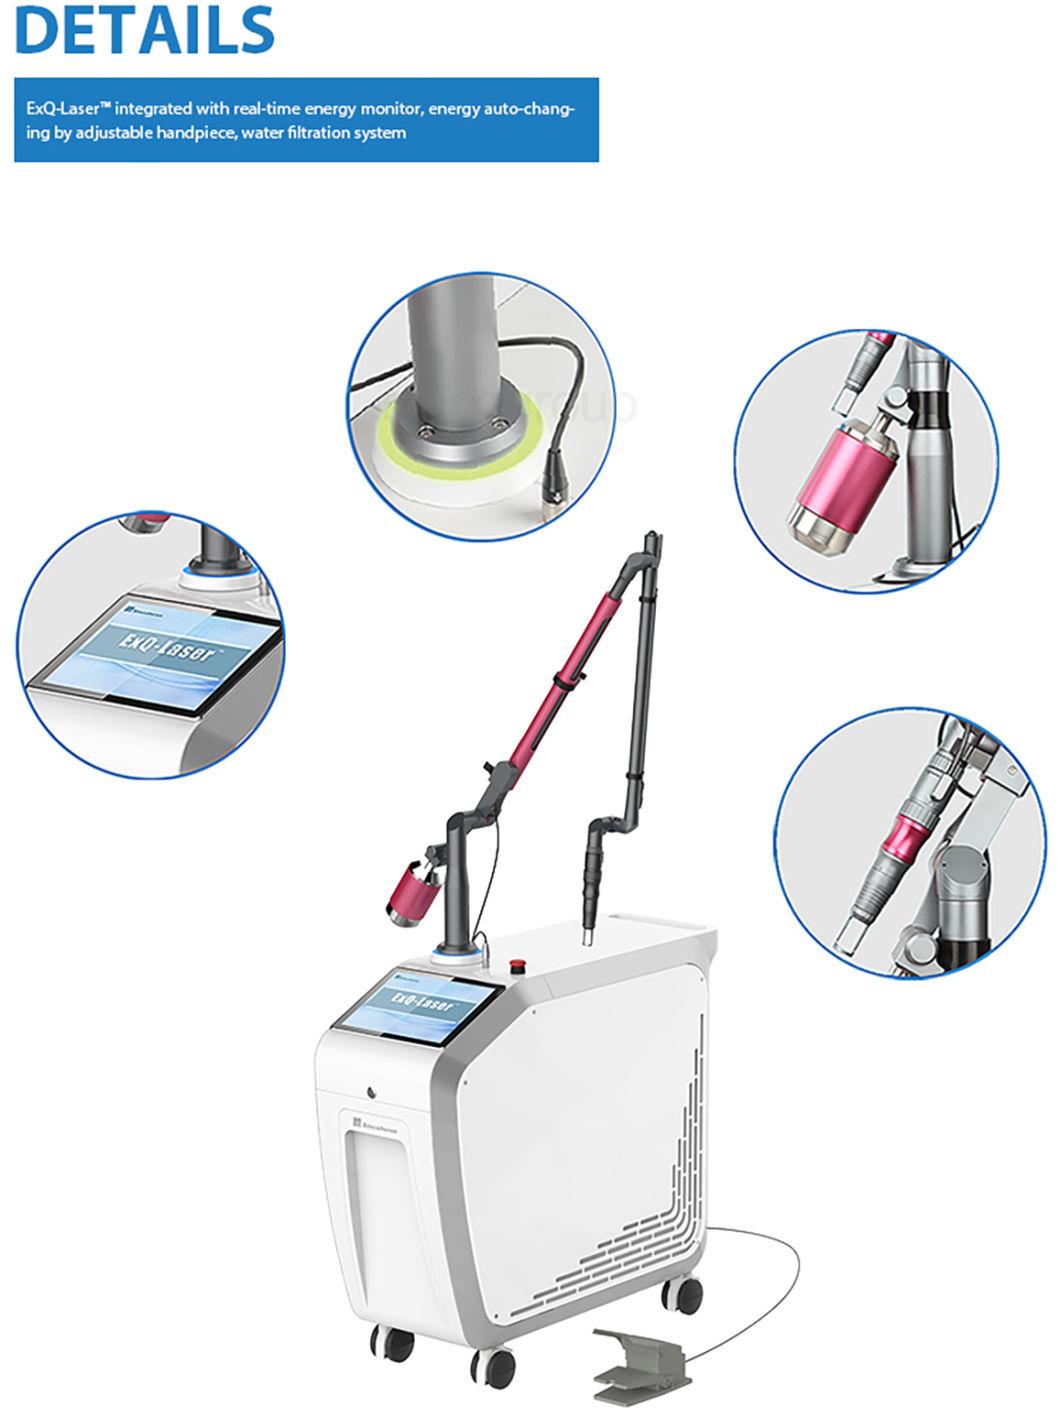 Laser Tattoo Removal Machine Uses The Blasting Effect of Laser. The Laser Effectively Penetrates The Epidermis and Can Reach The Pigment Clusters in The Dermis